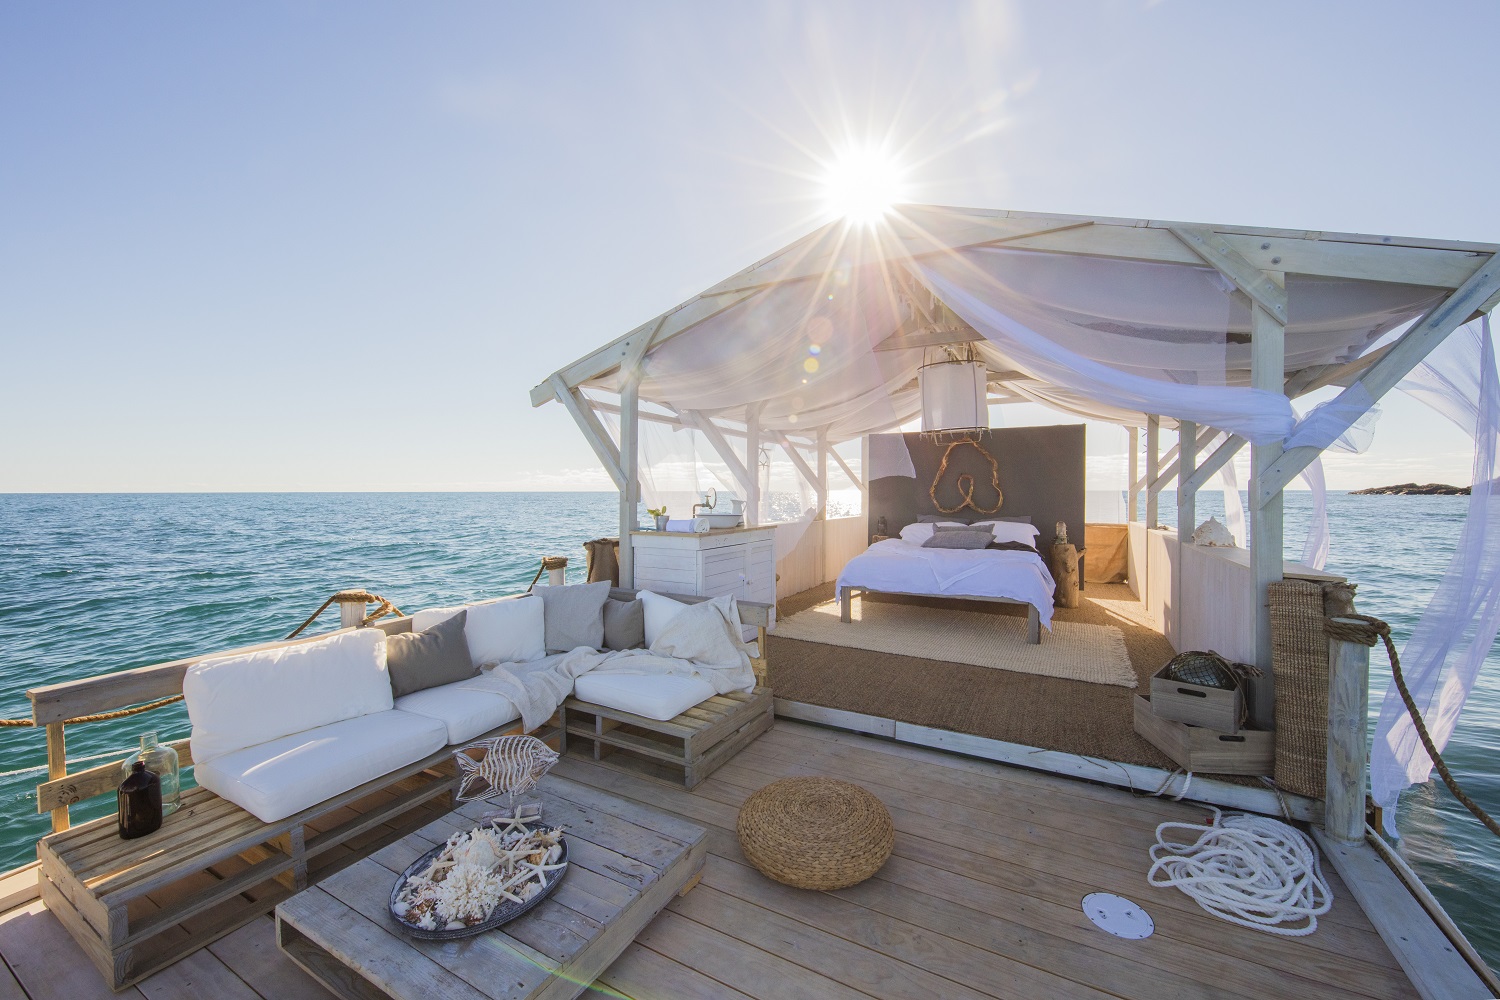 Live for a Night in a Floating Bedroom on the Great Barrier Reef